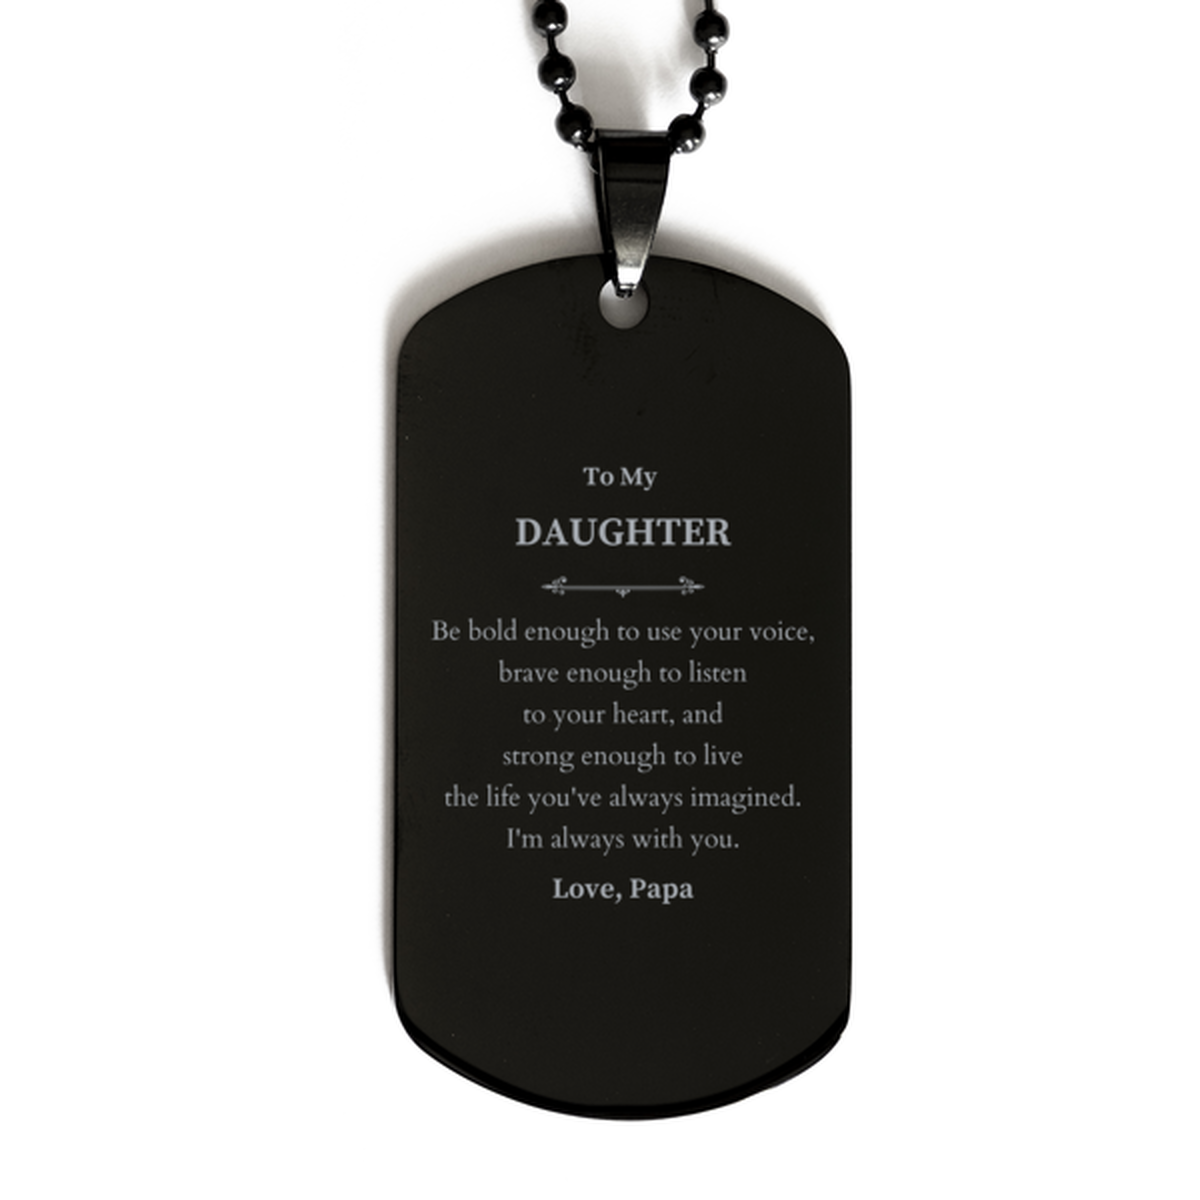 Keepsake Daughter Black Dog Tag Gift Idea Graduation Christmas Birthday Daughter from Papa, Daughter Be bold enough to use your voice, brave enough to listen to your heart. Love, Papa